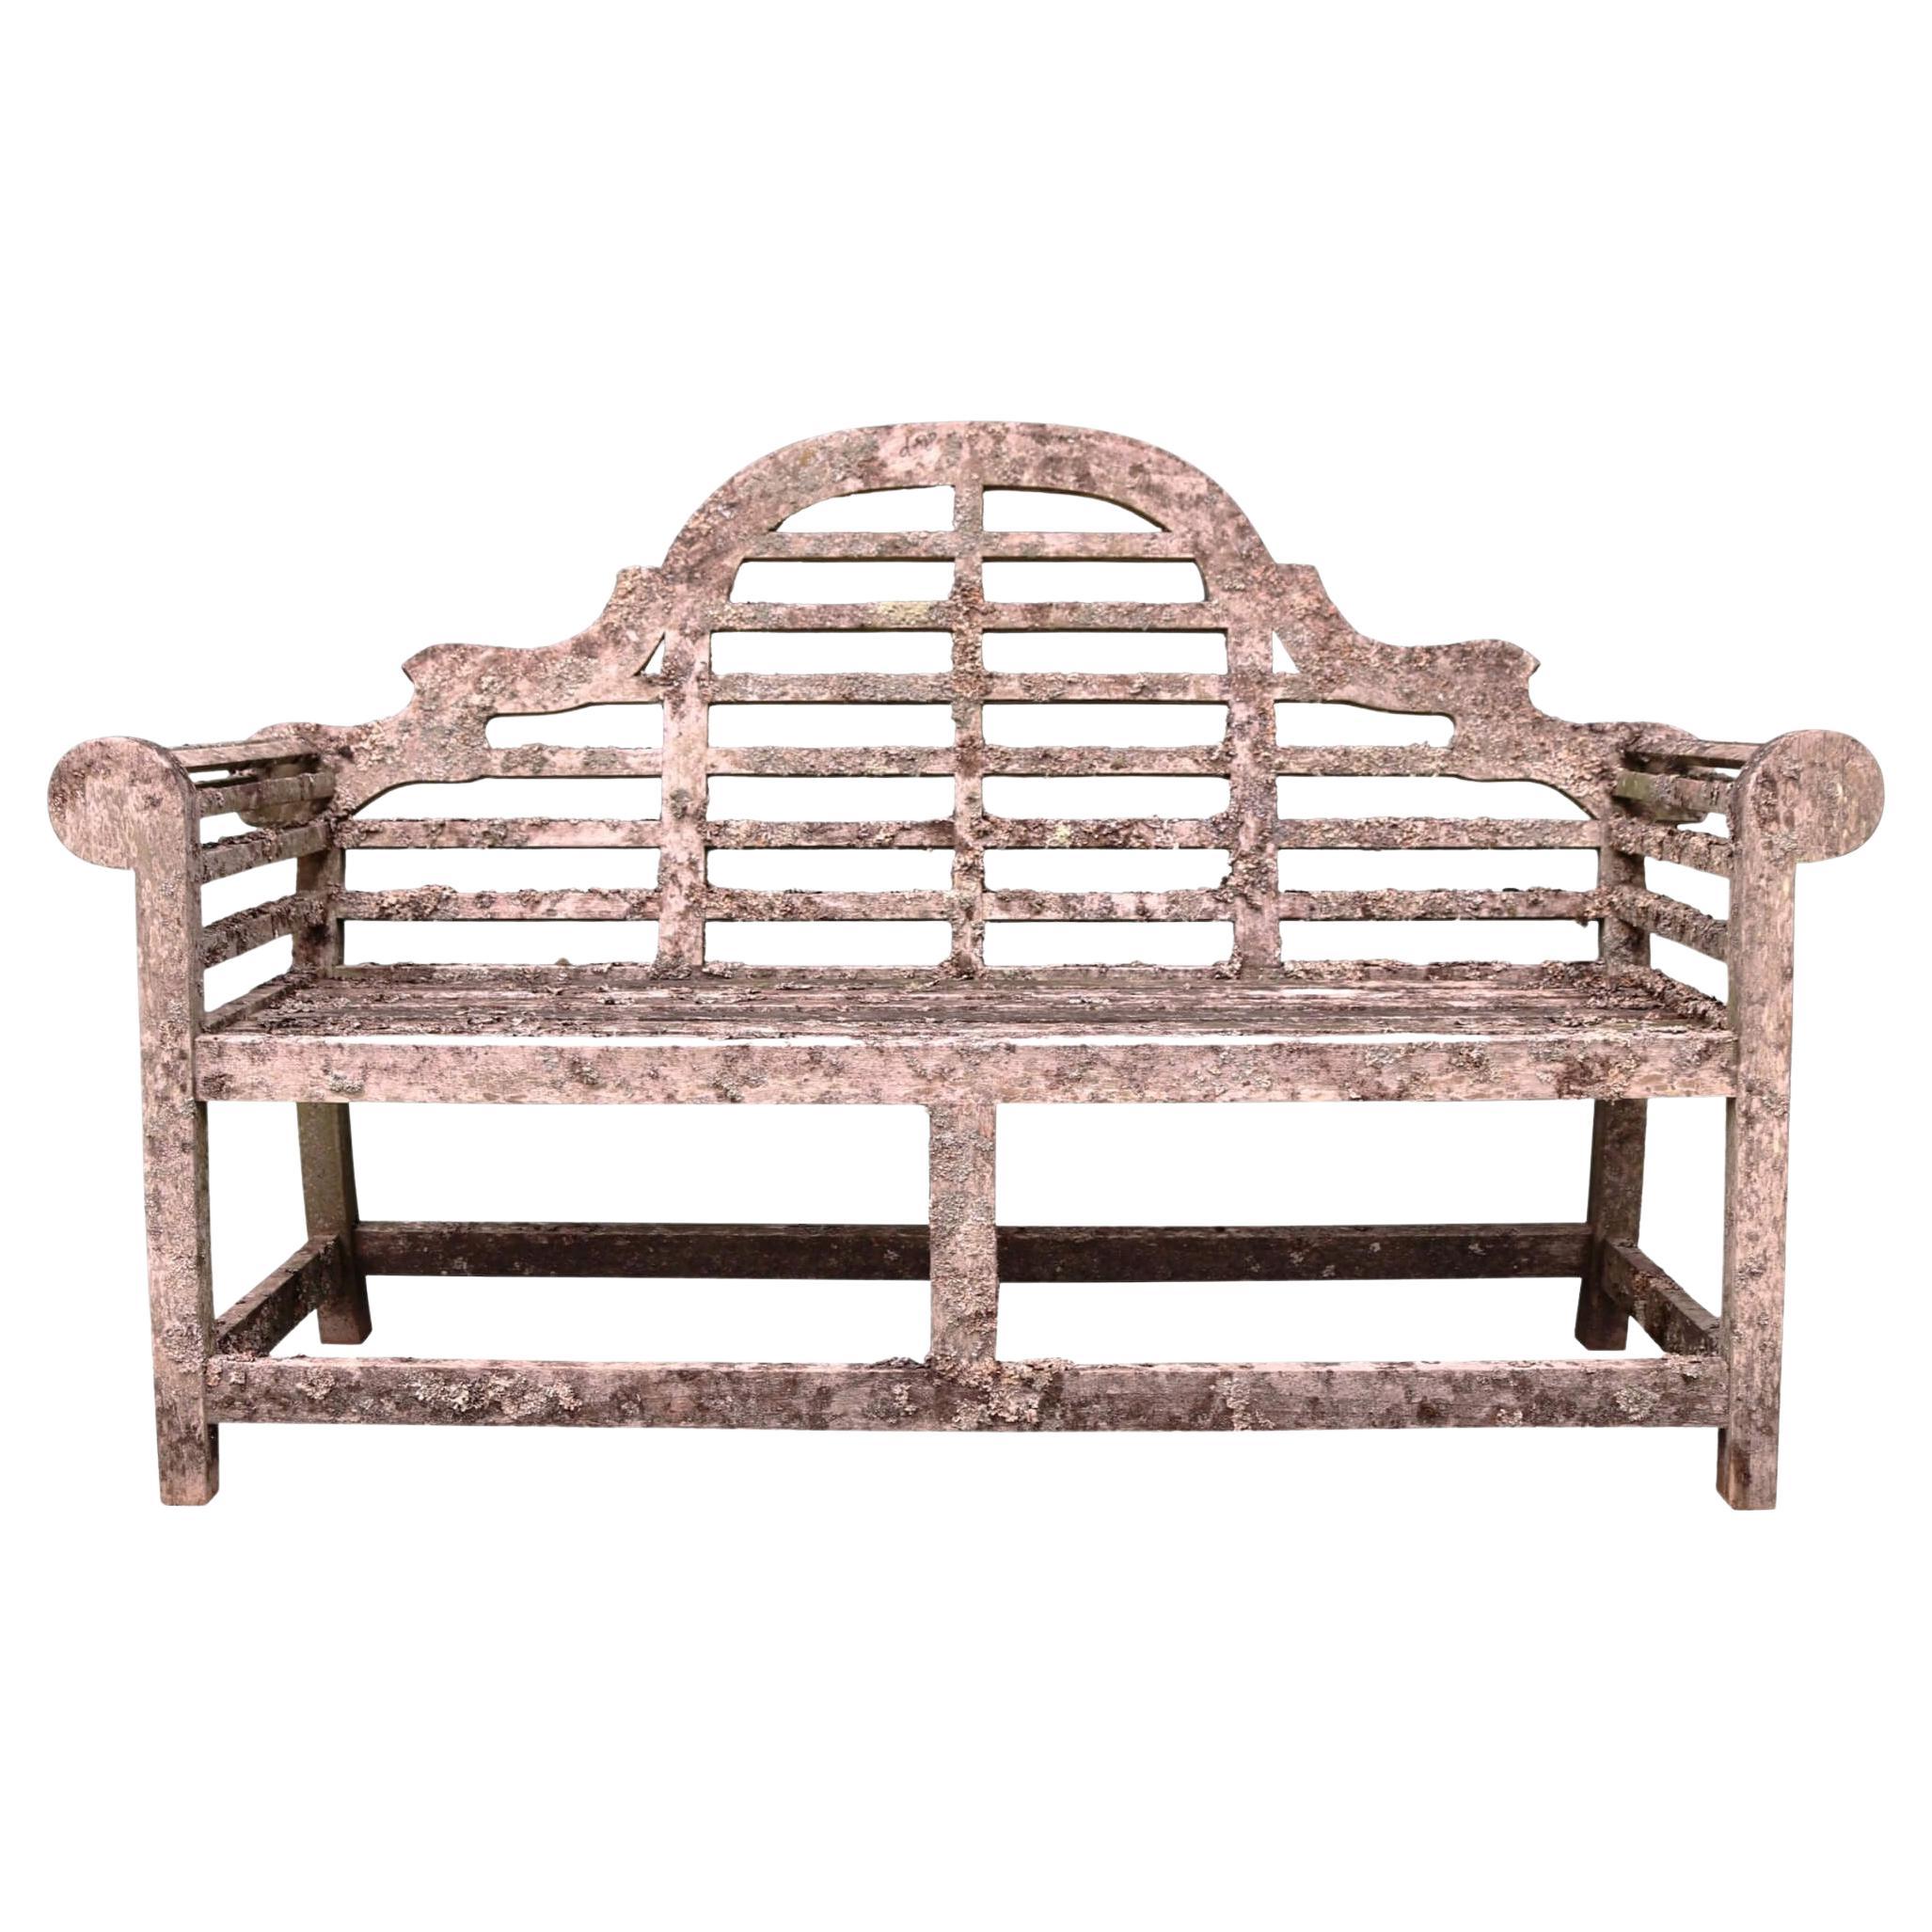 3 Seater Reclaimed Garden Bench Seat For Sale